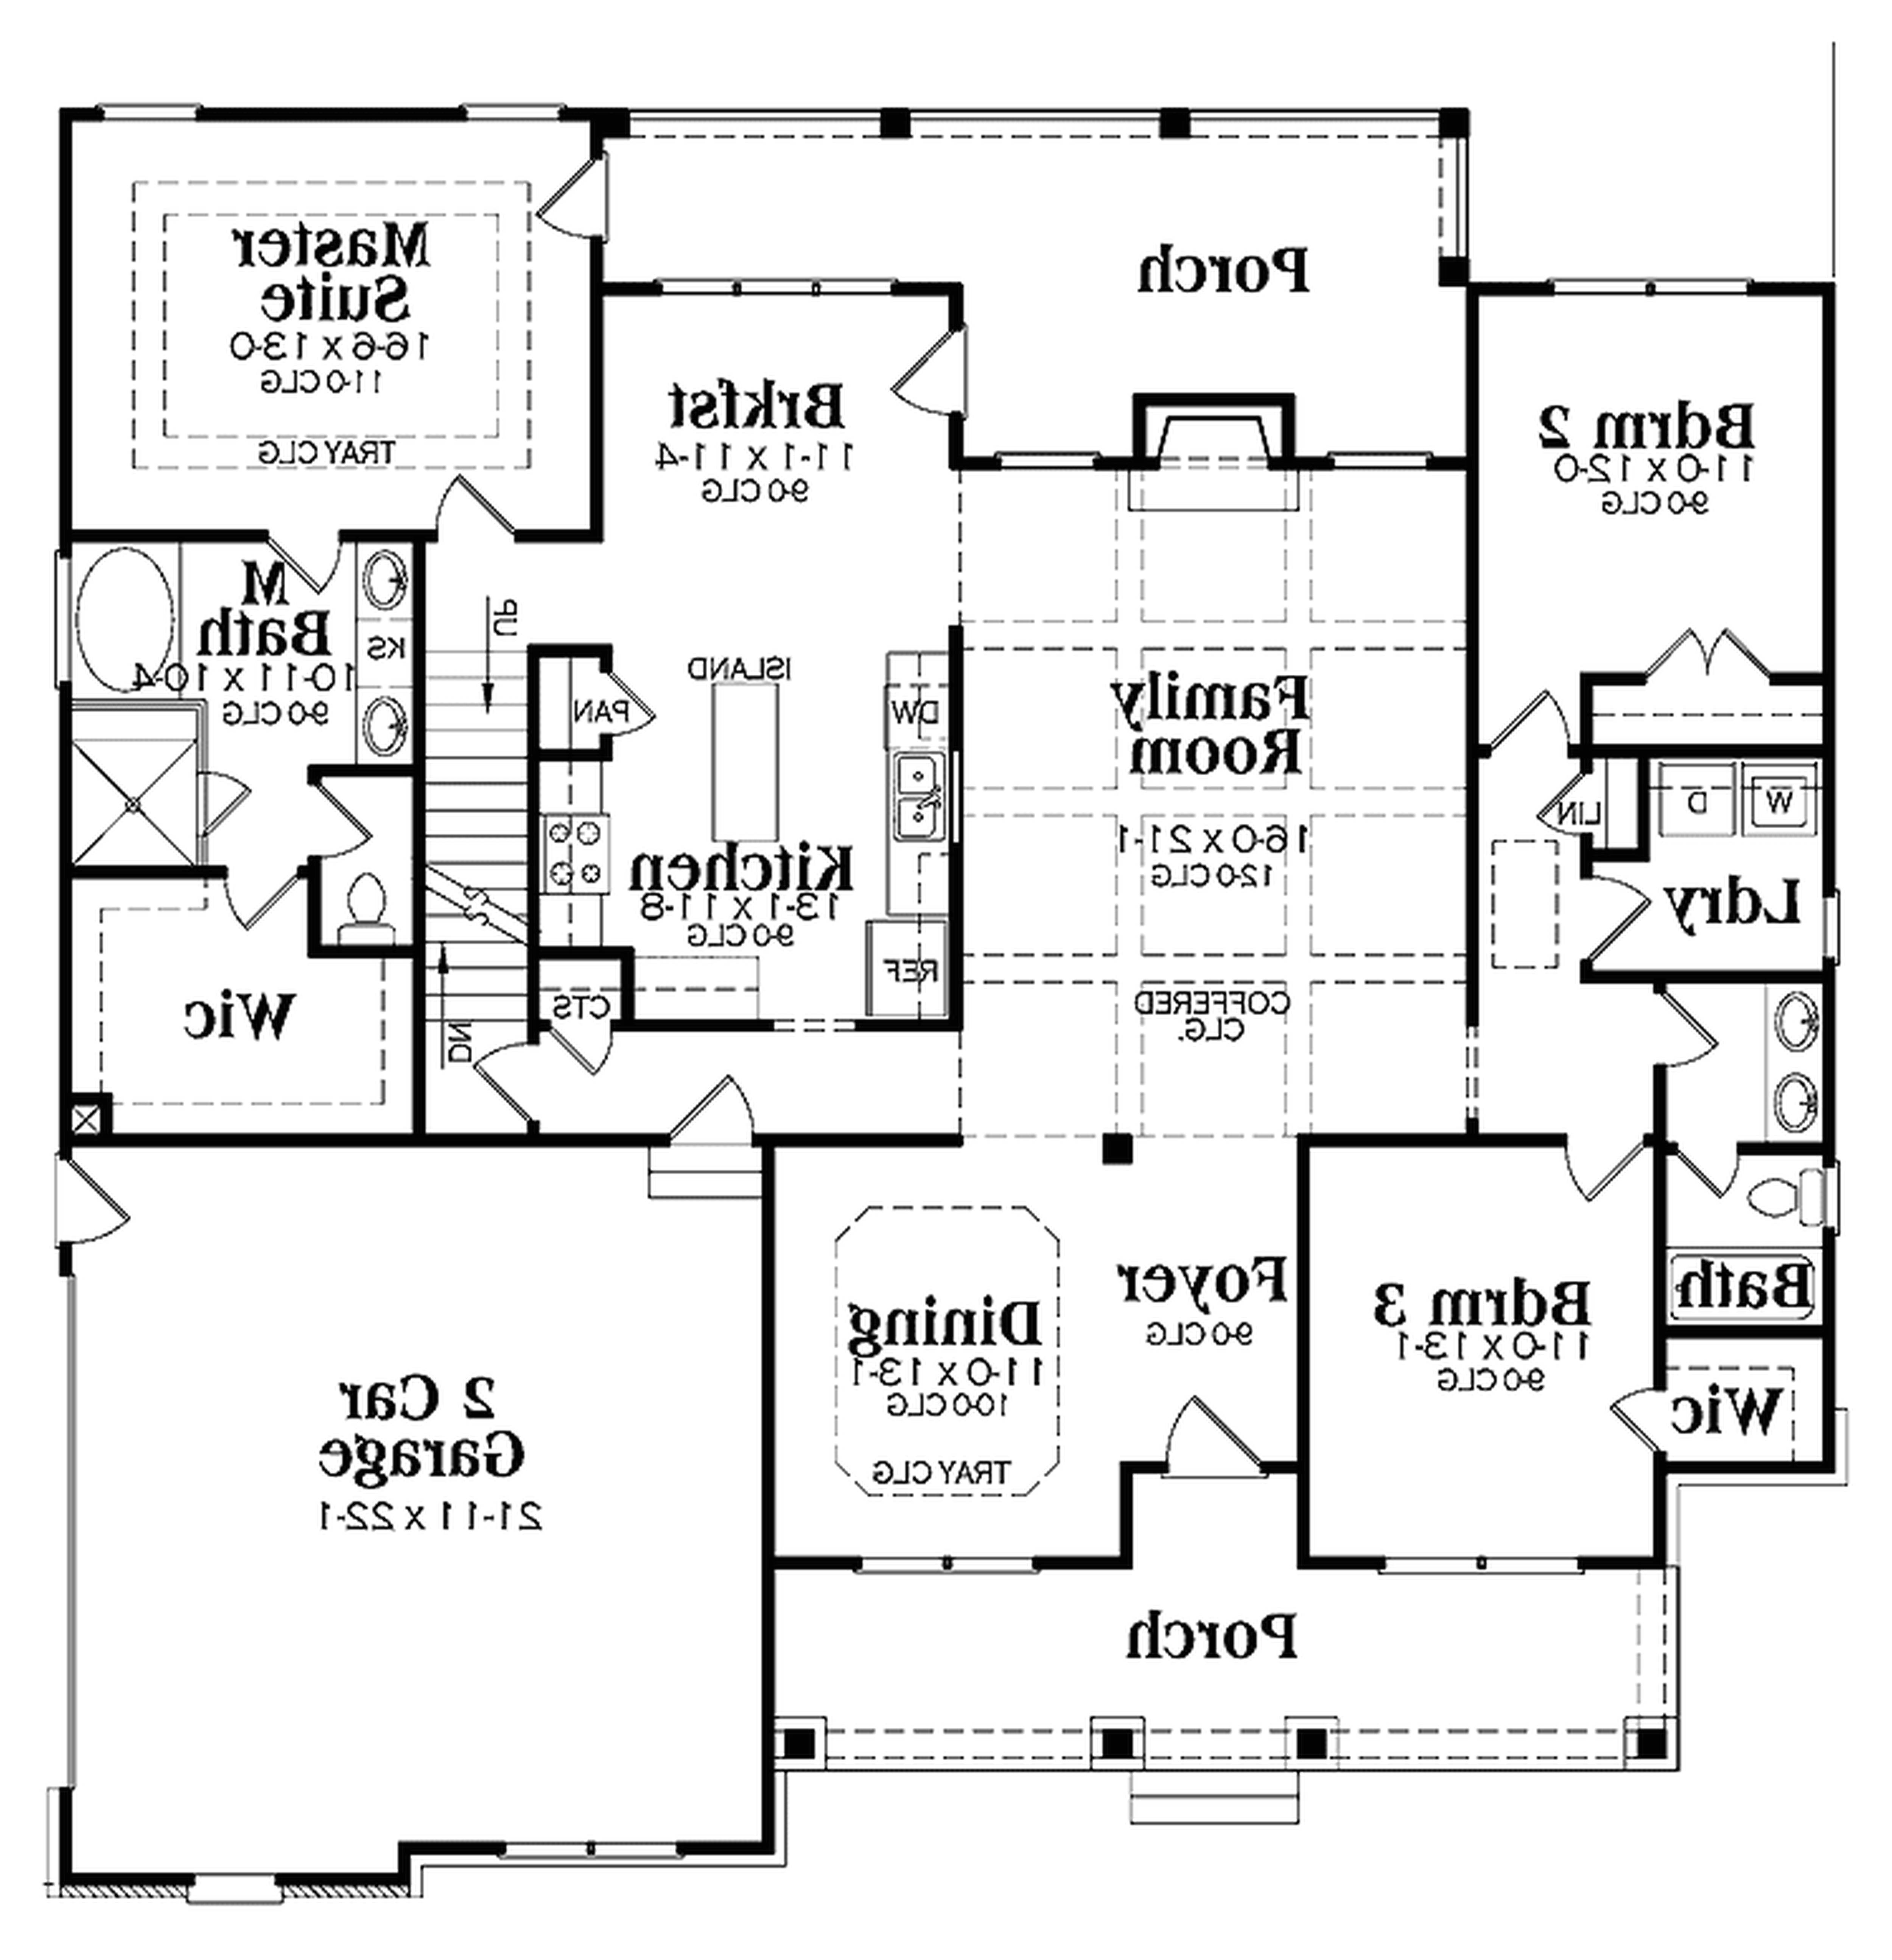 Open Concept Two Story House Plans 2 Story Open Concept House Plans 2018 House Plans and